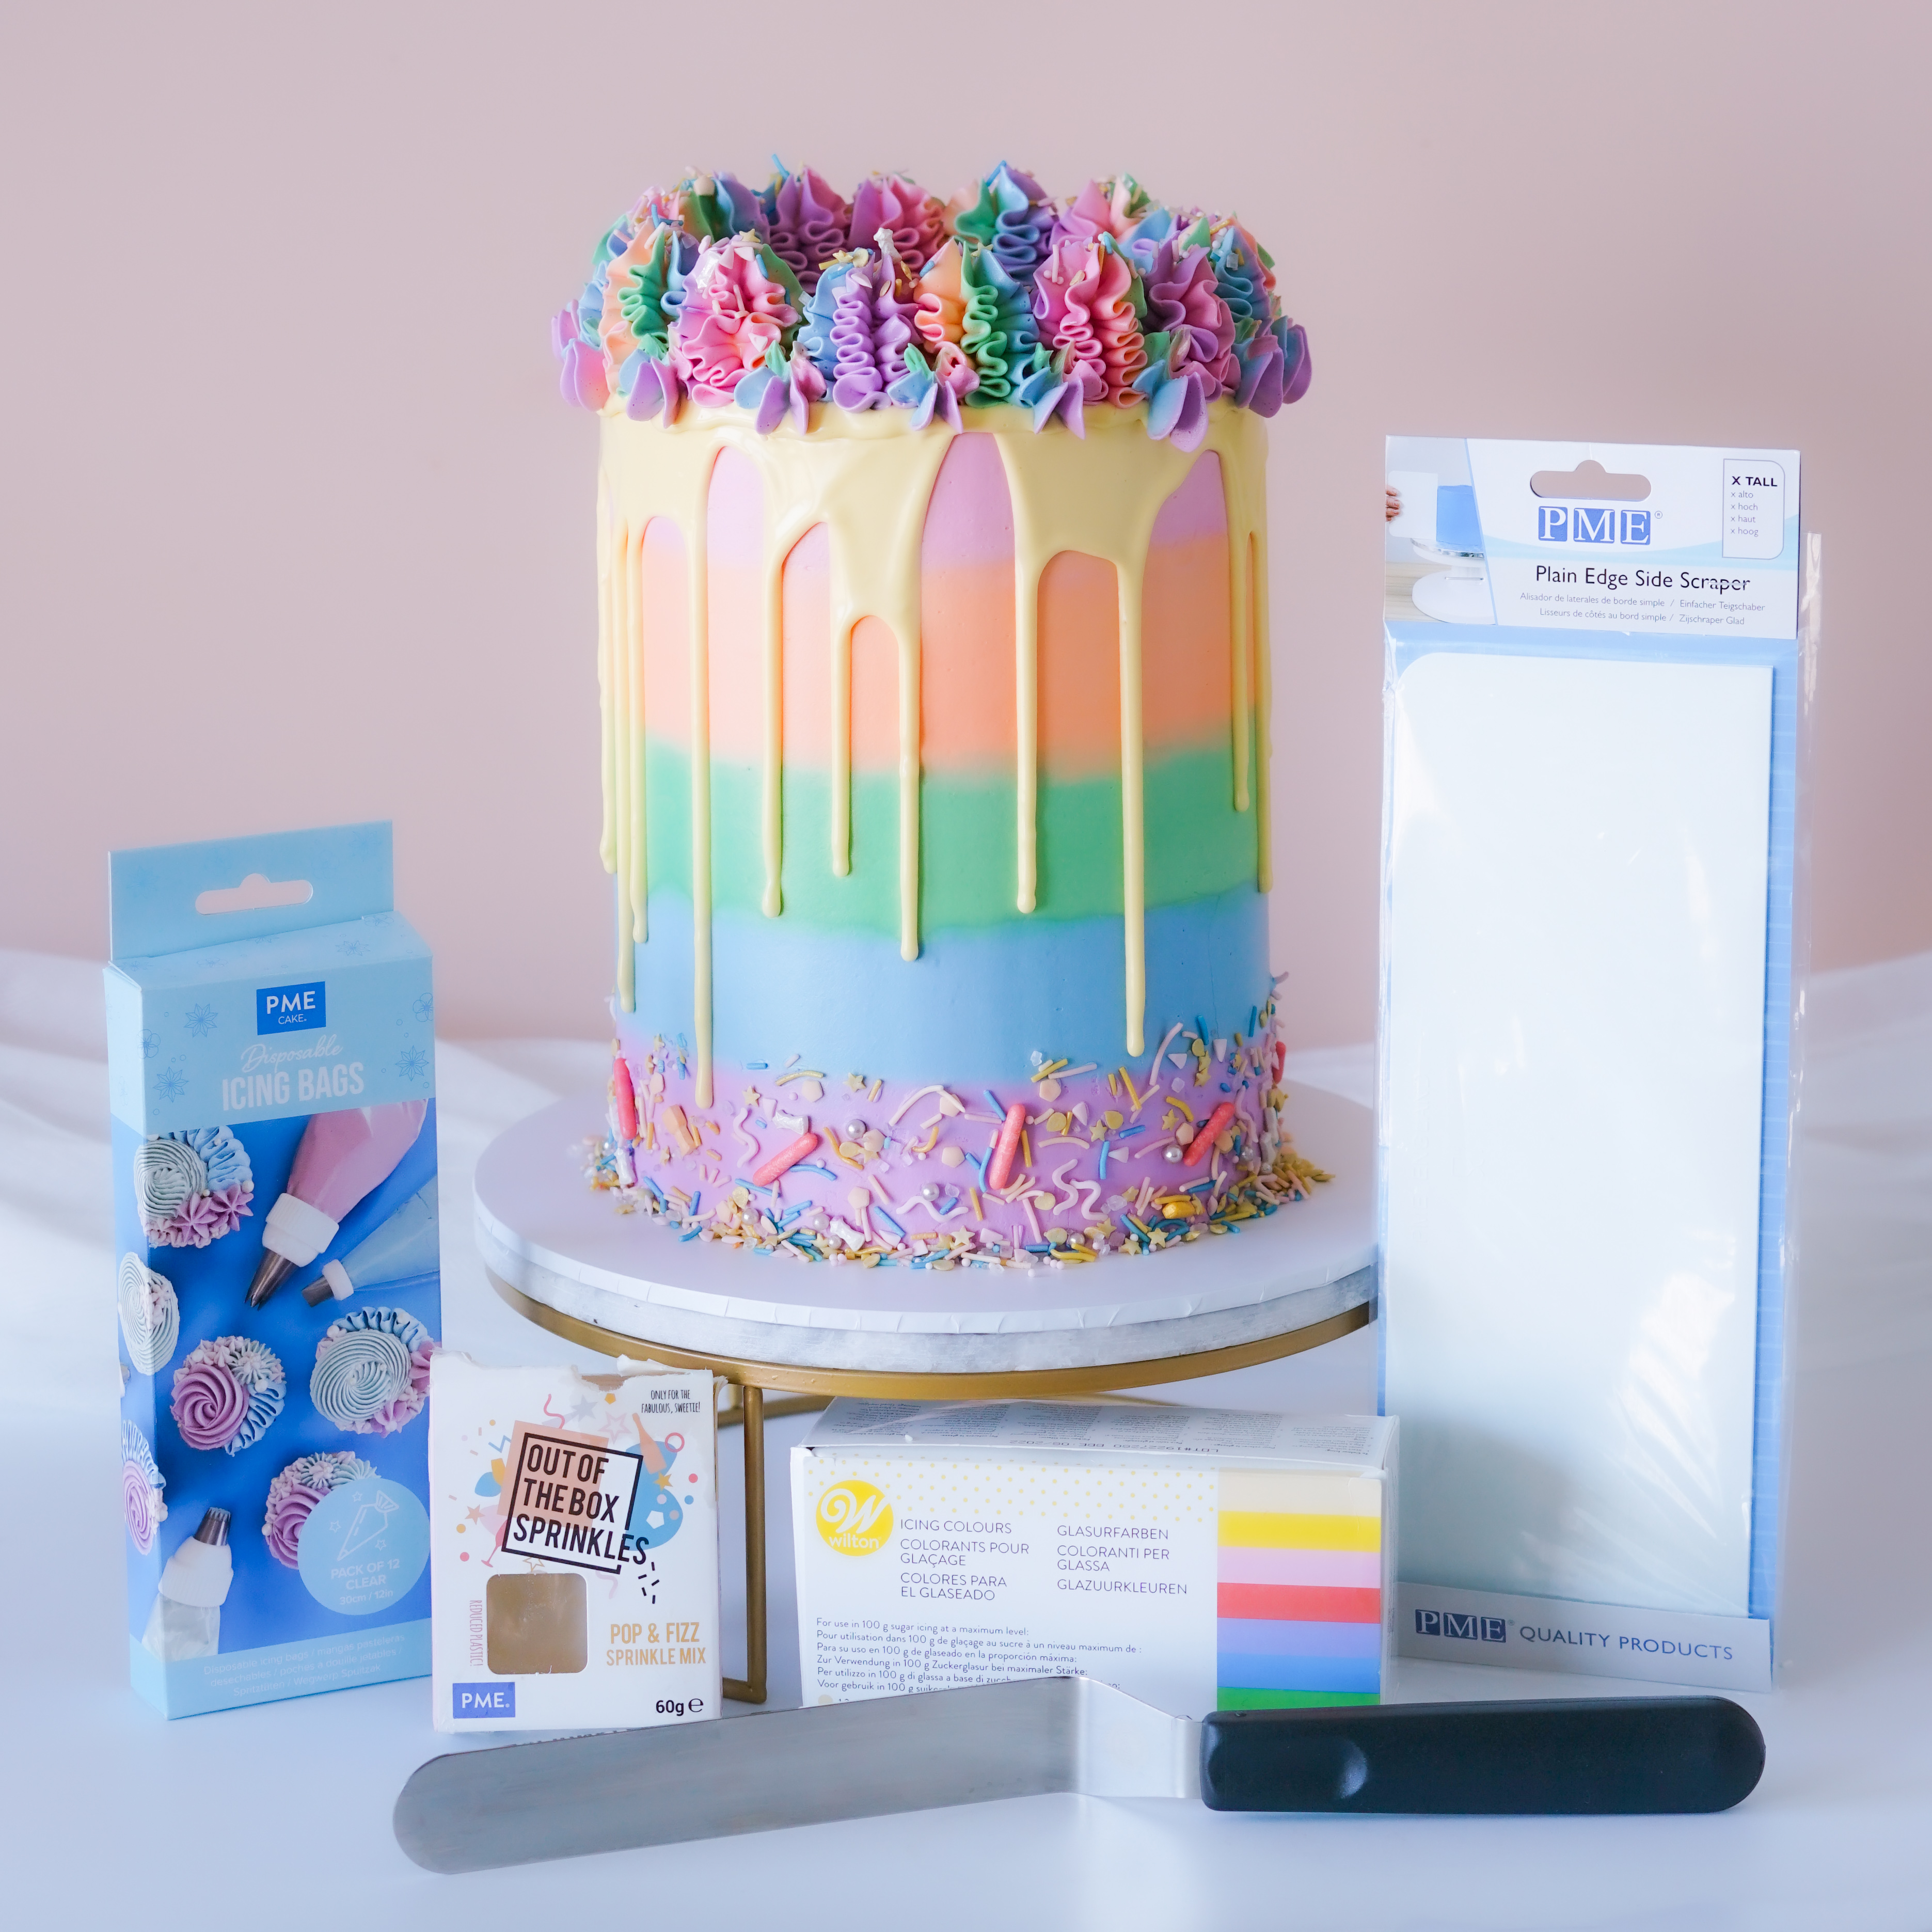 Step Up Your Cake Decorating Game With These Must-Haves, According To A Pro  Baker